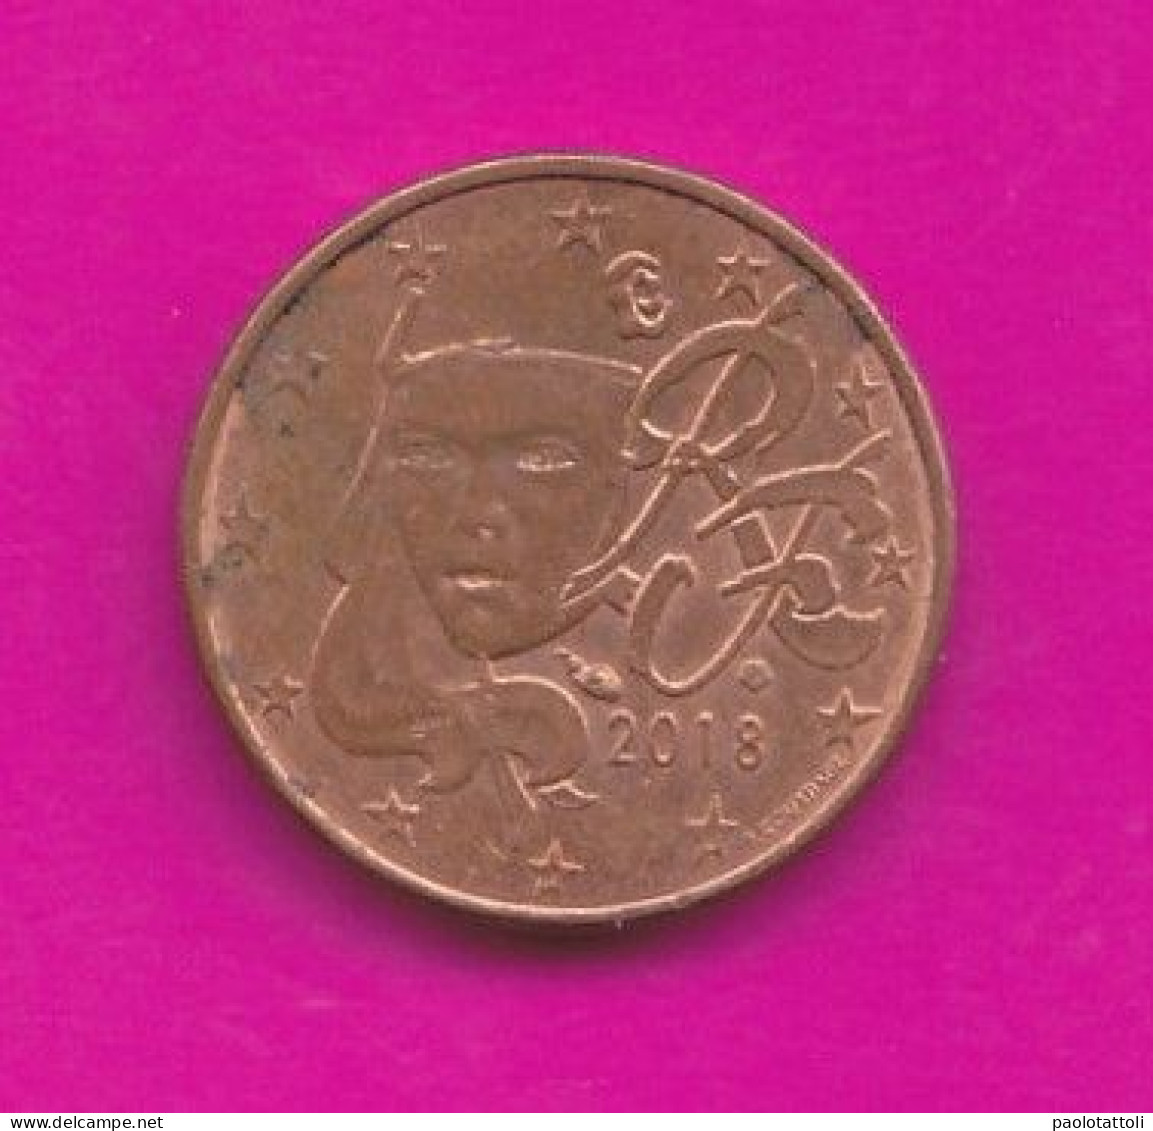 France, 2018- 1 Euro Cent- Mint Director Yves Sampoo- Copper Plated Steel- Obverse Marianne De Courtiade. - Frankreich